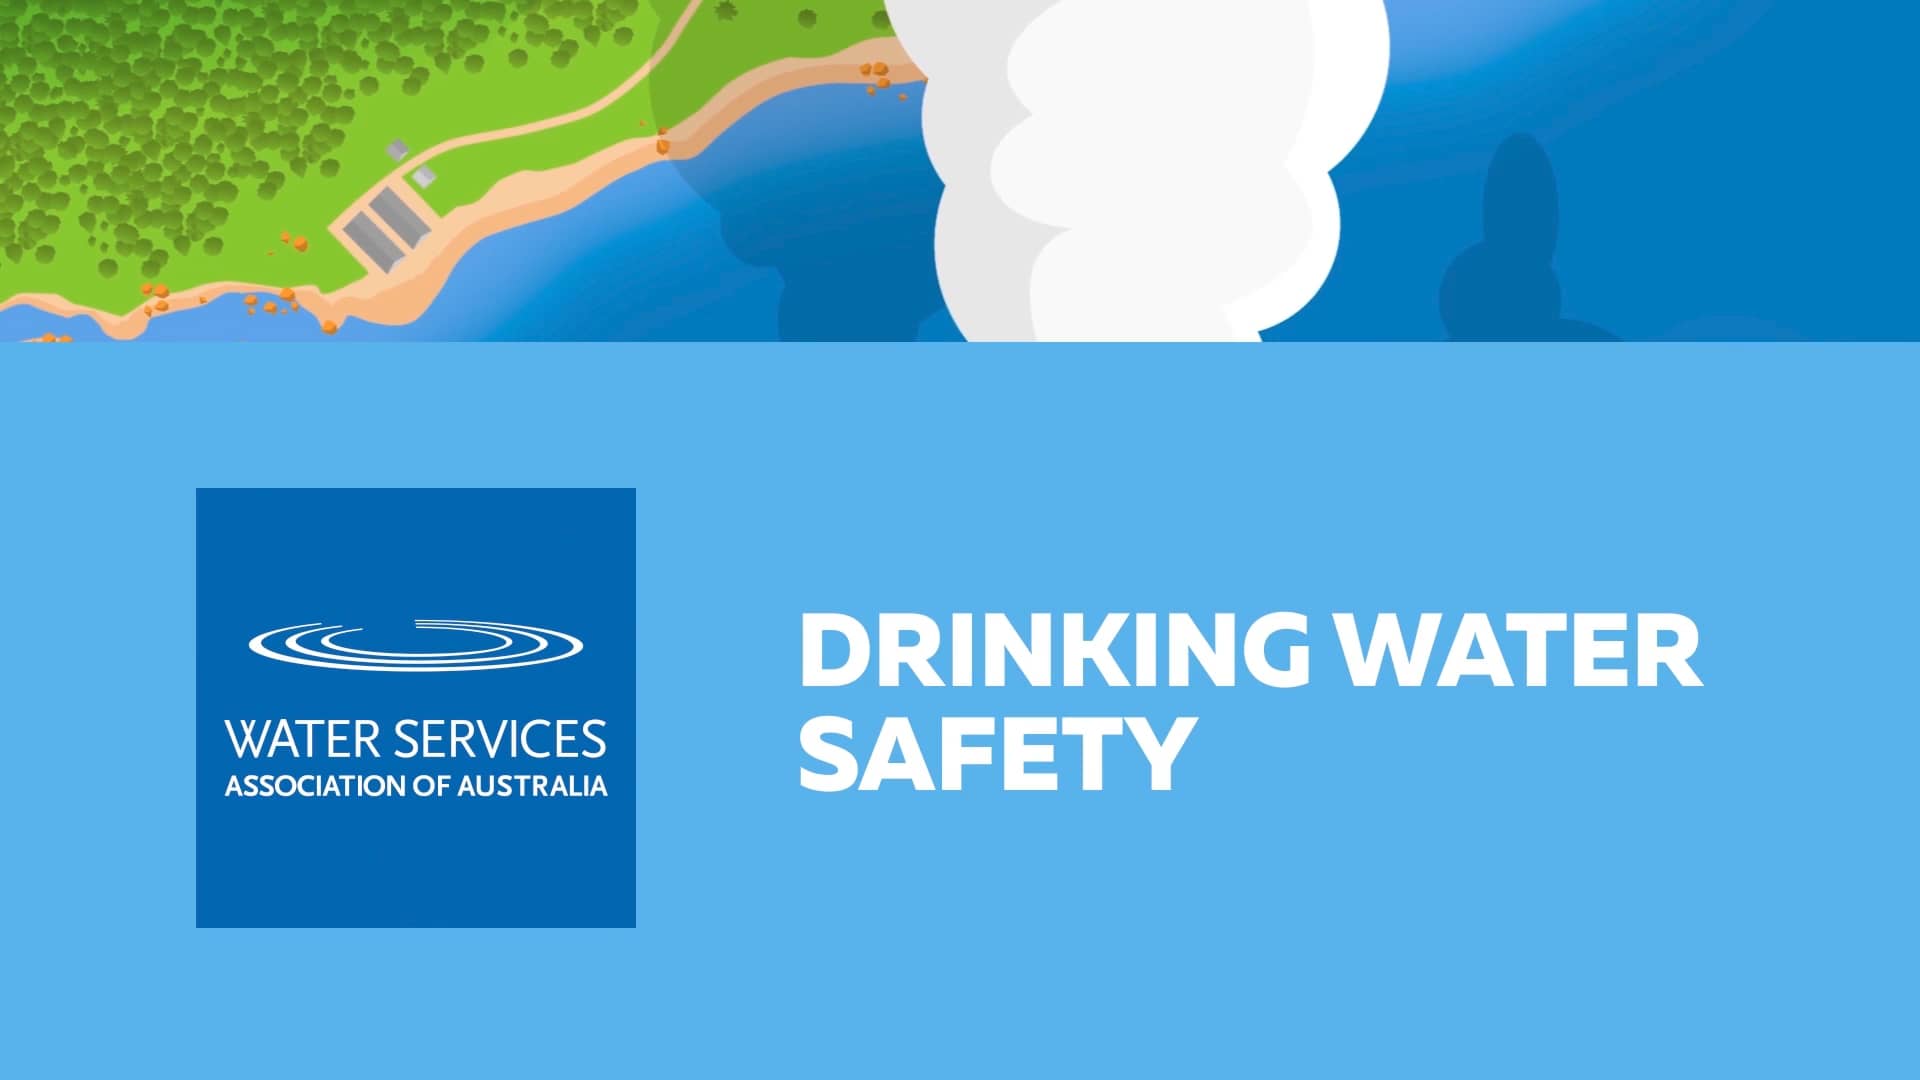 Health Based Targets For Drinking Water Safety On Vimeo 8068